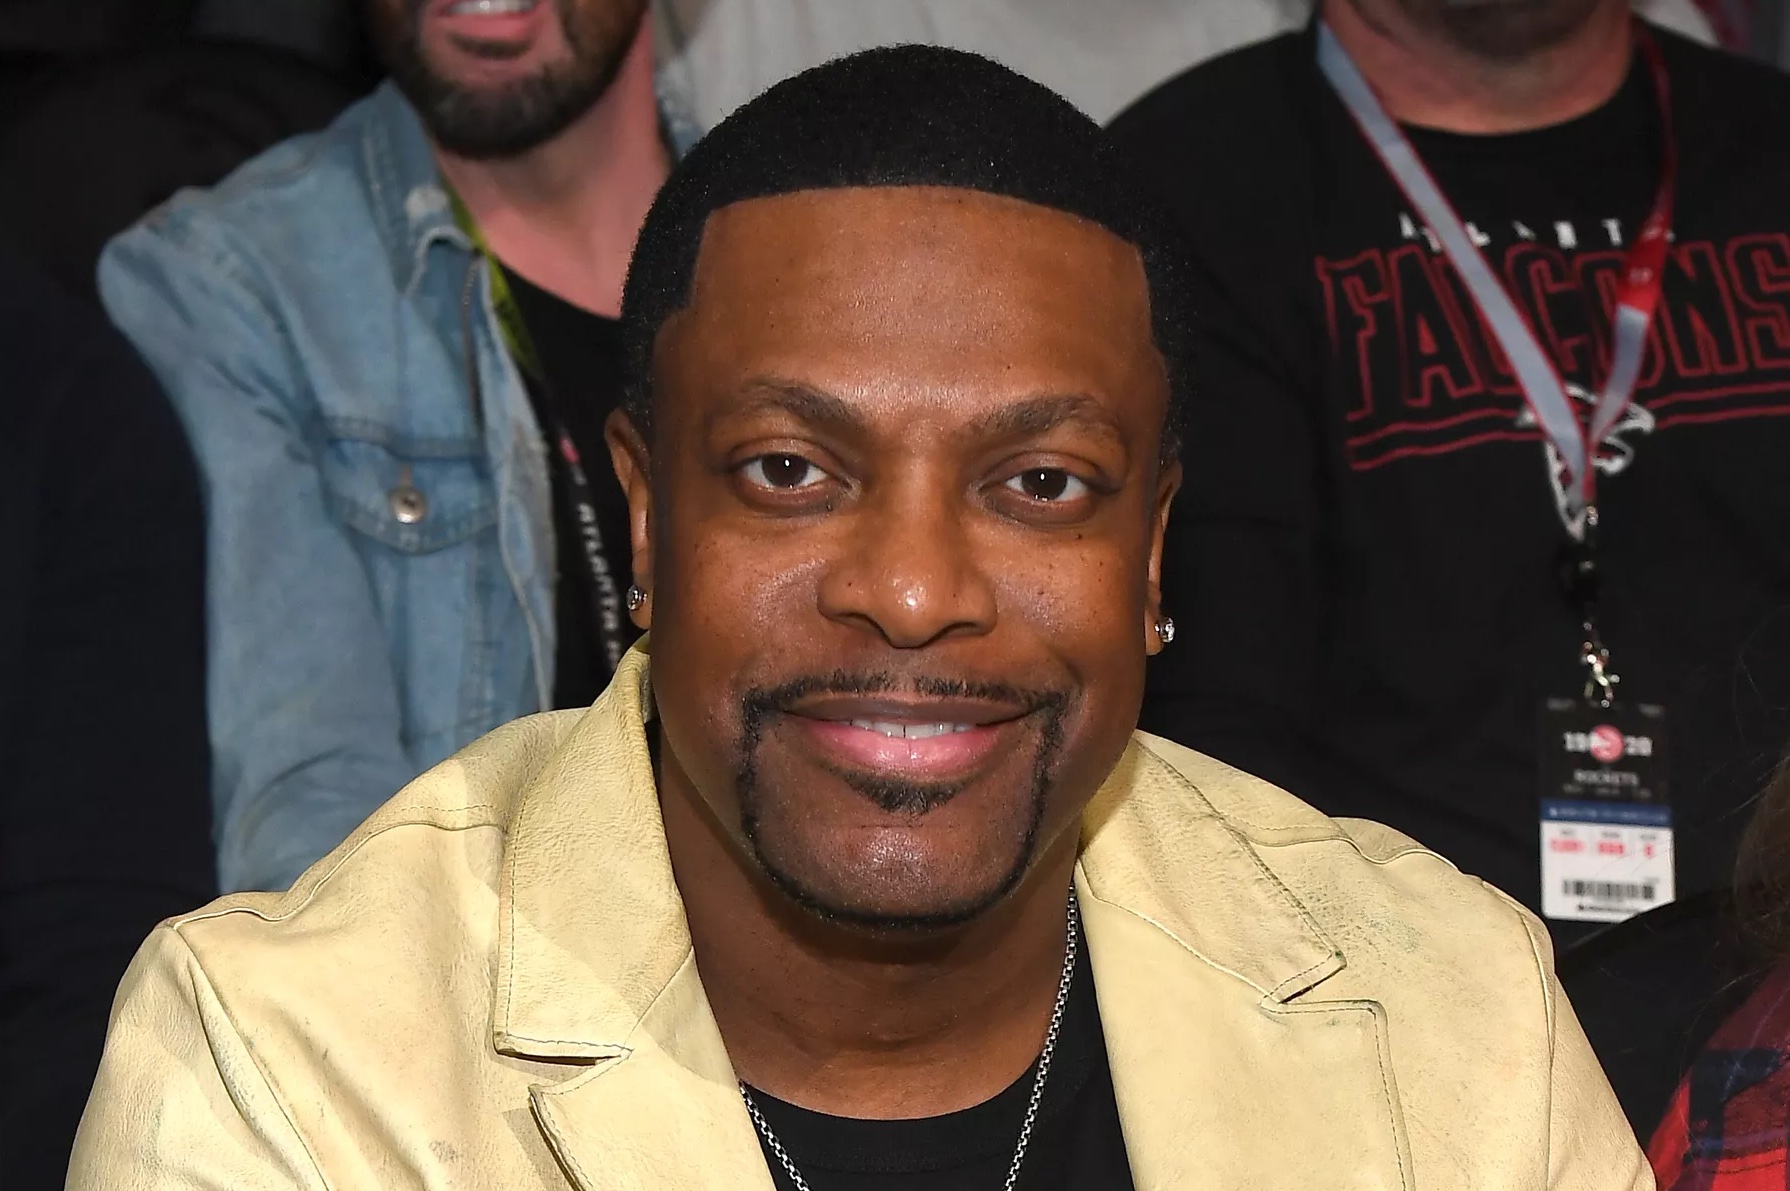 Chris_Tucker_Only_Got_Paid_10K_For _Friday_Says_No_To_Rumored_Reboot